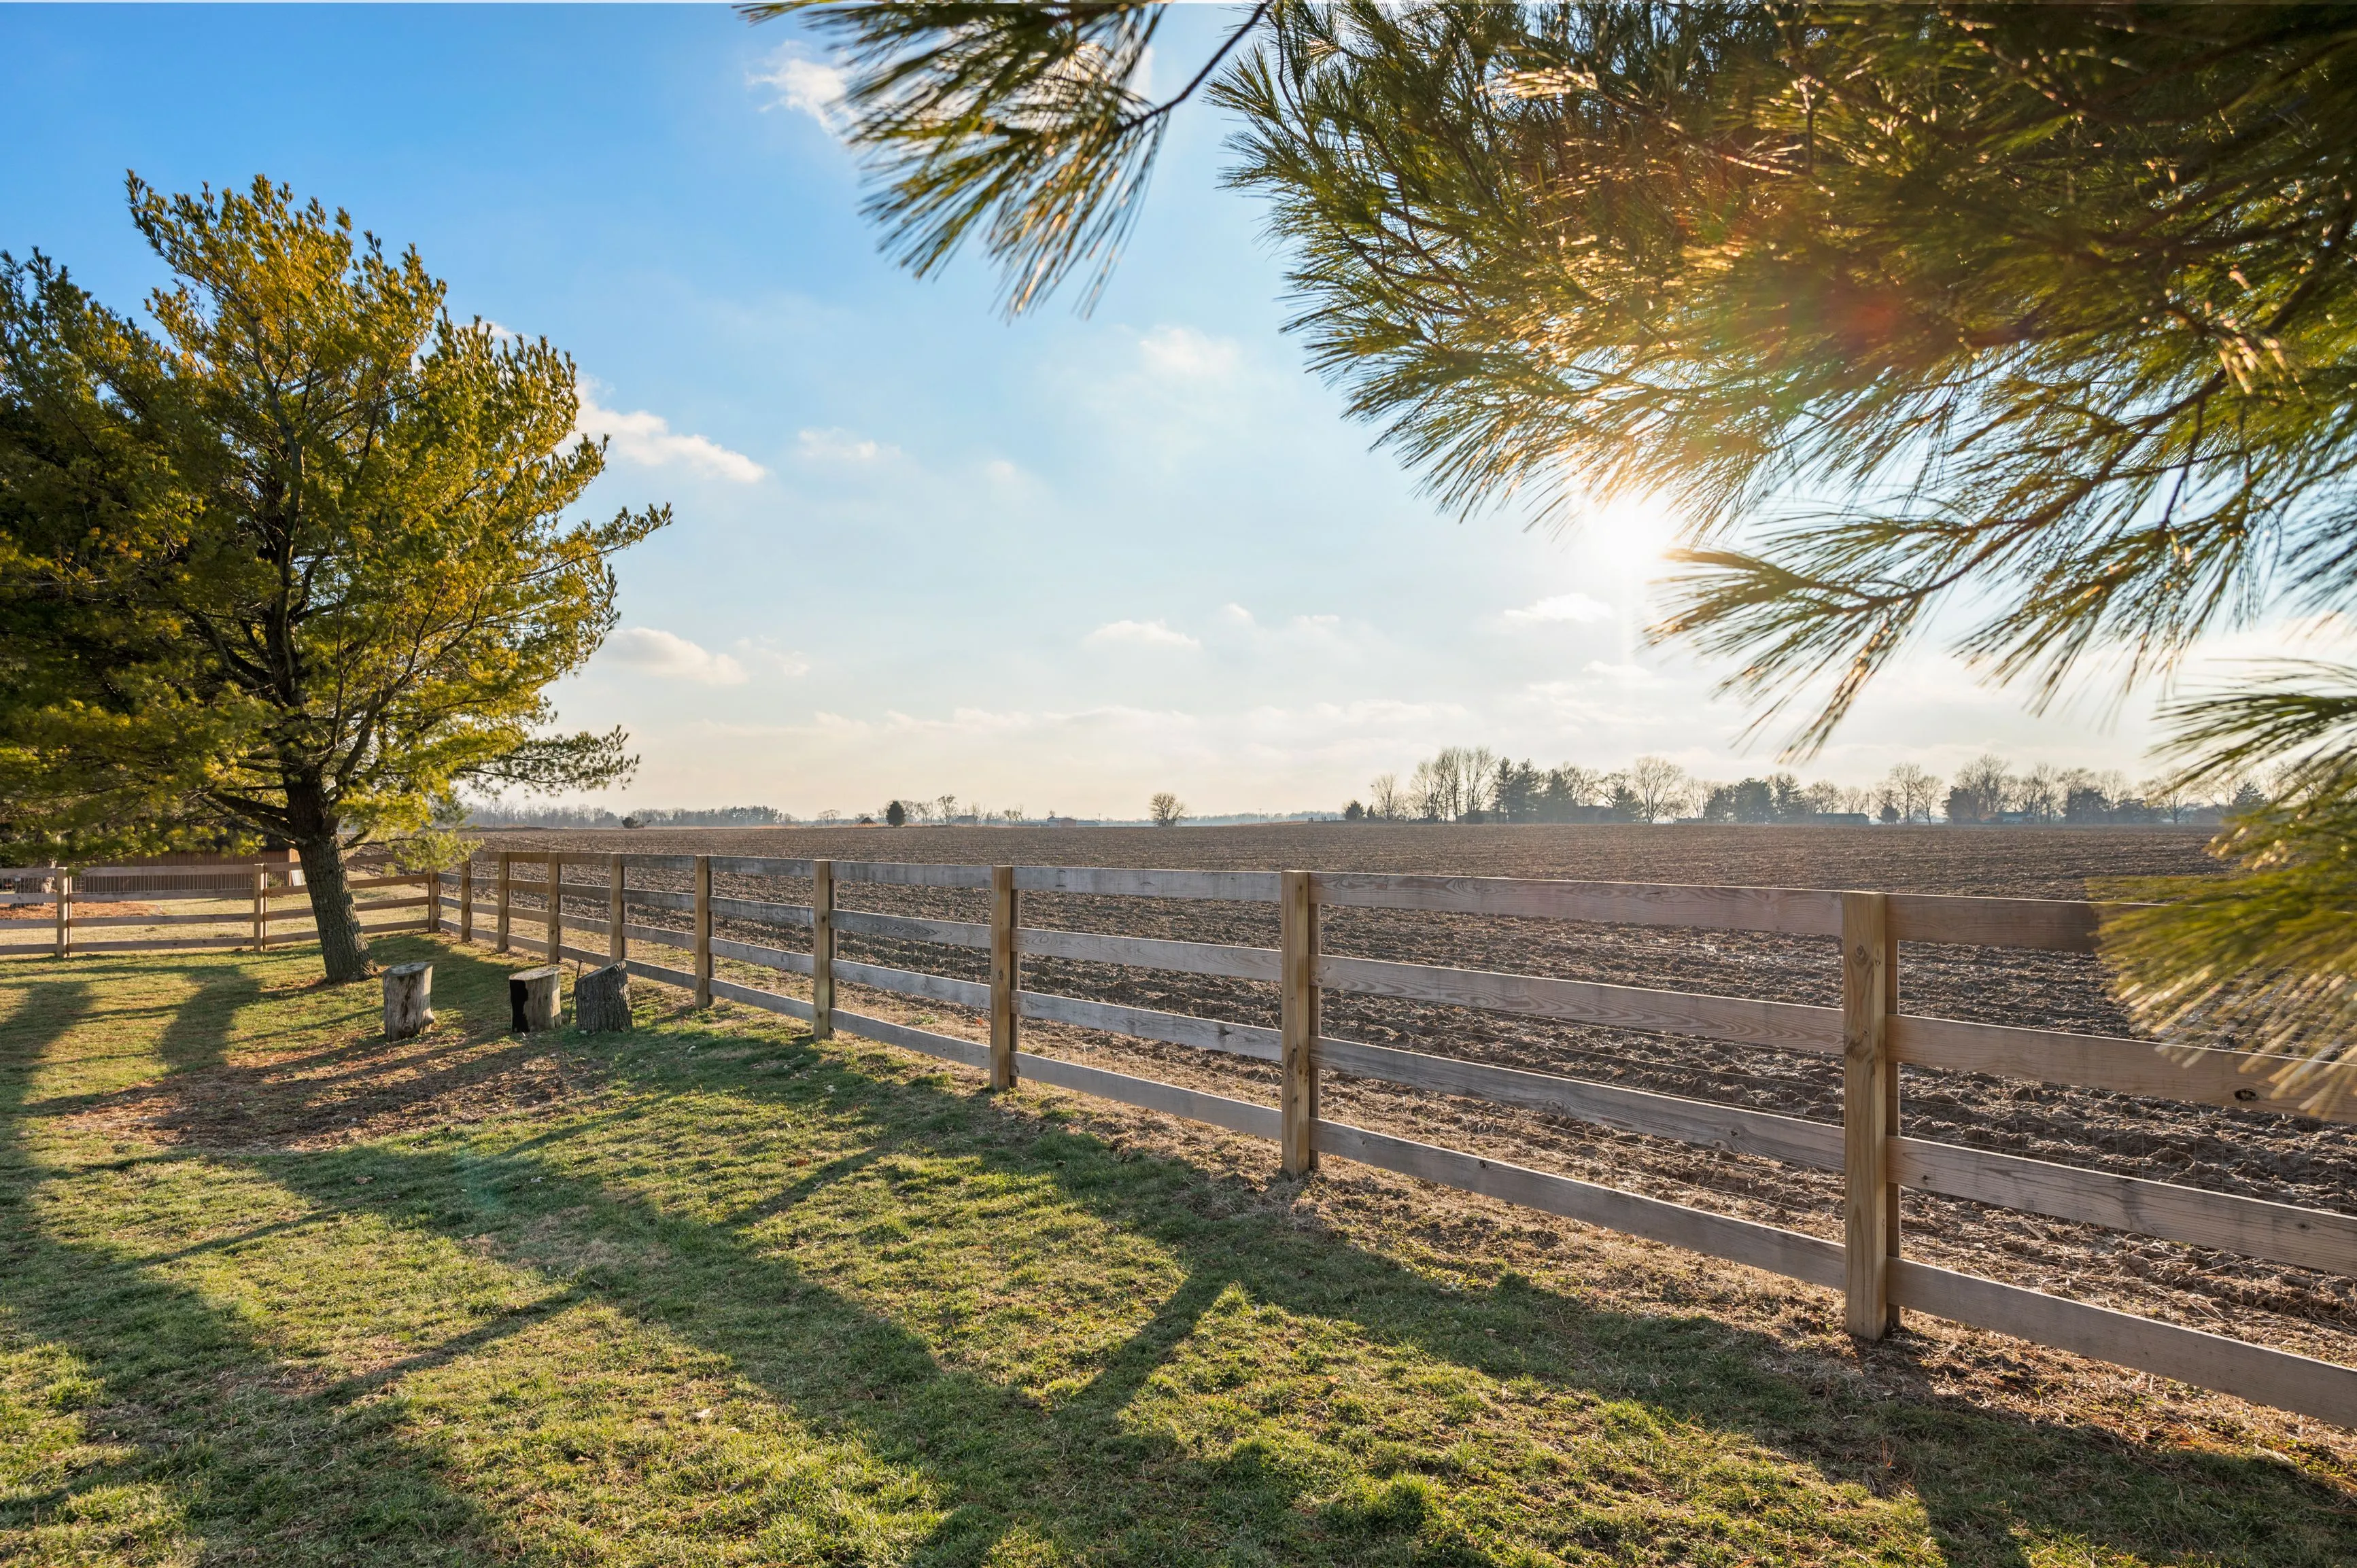 Rural landscape with a wooden fence, trees, and plowed field under a clear sky with sunbeams.